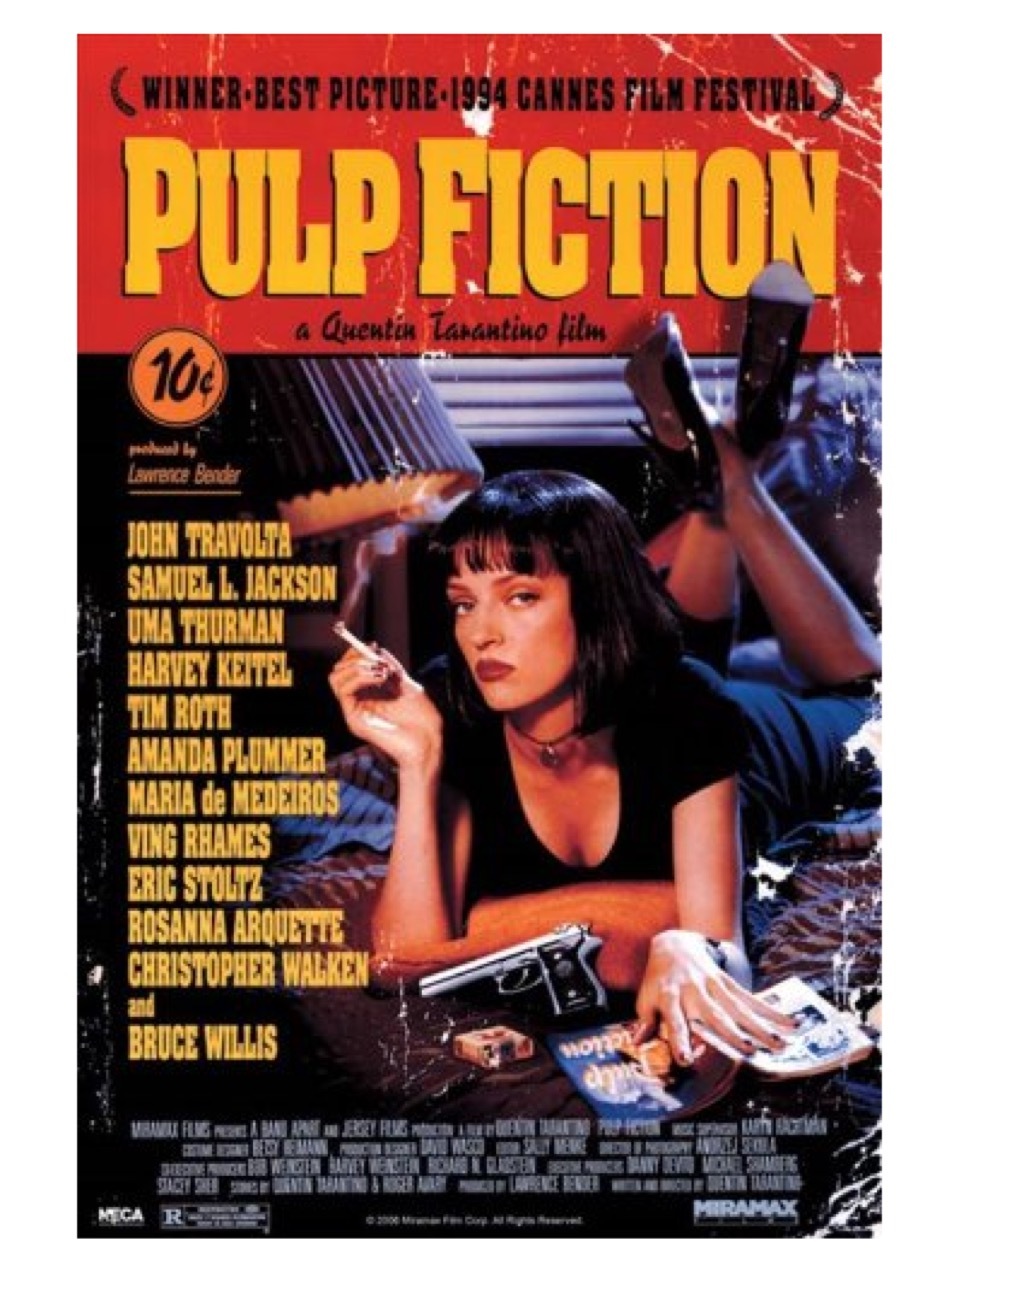 Pulp Fiction poster, what to give up in your 40s